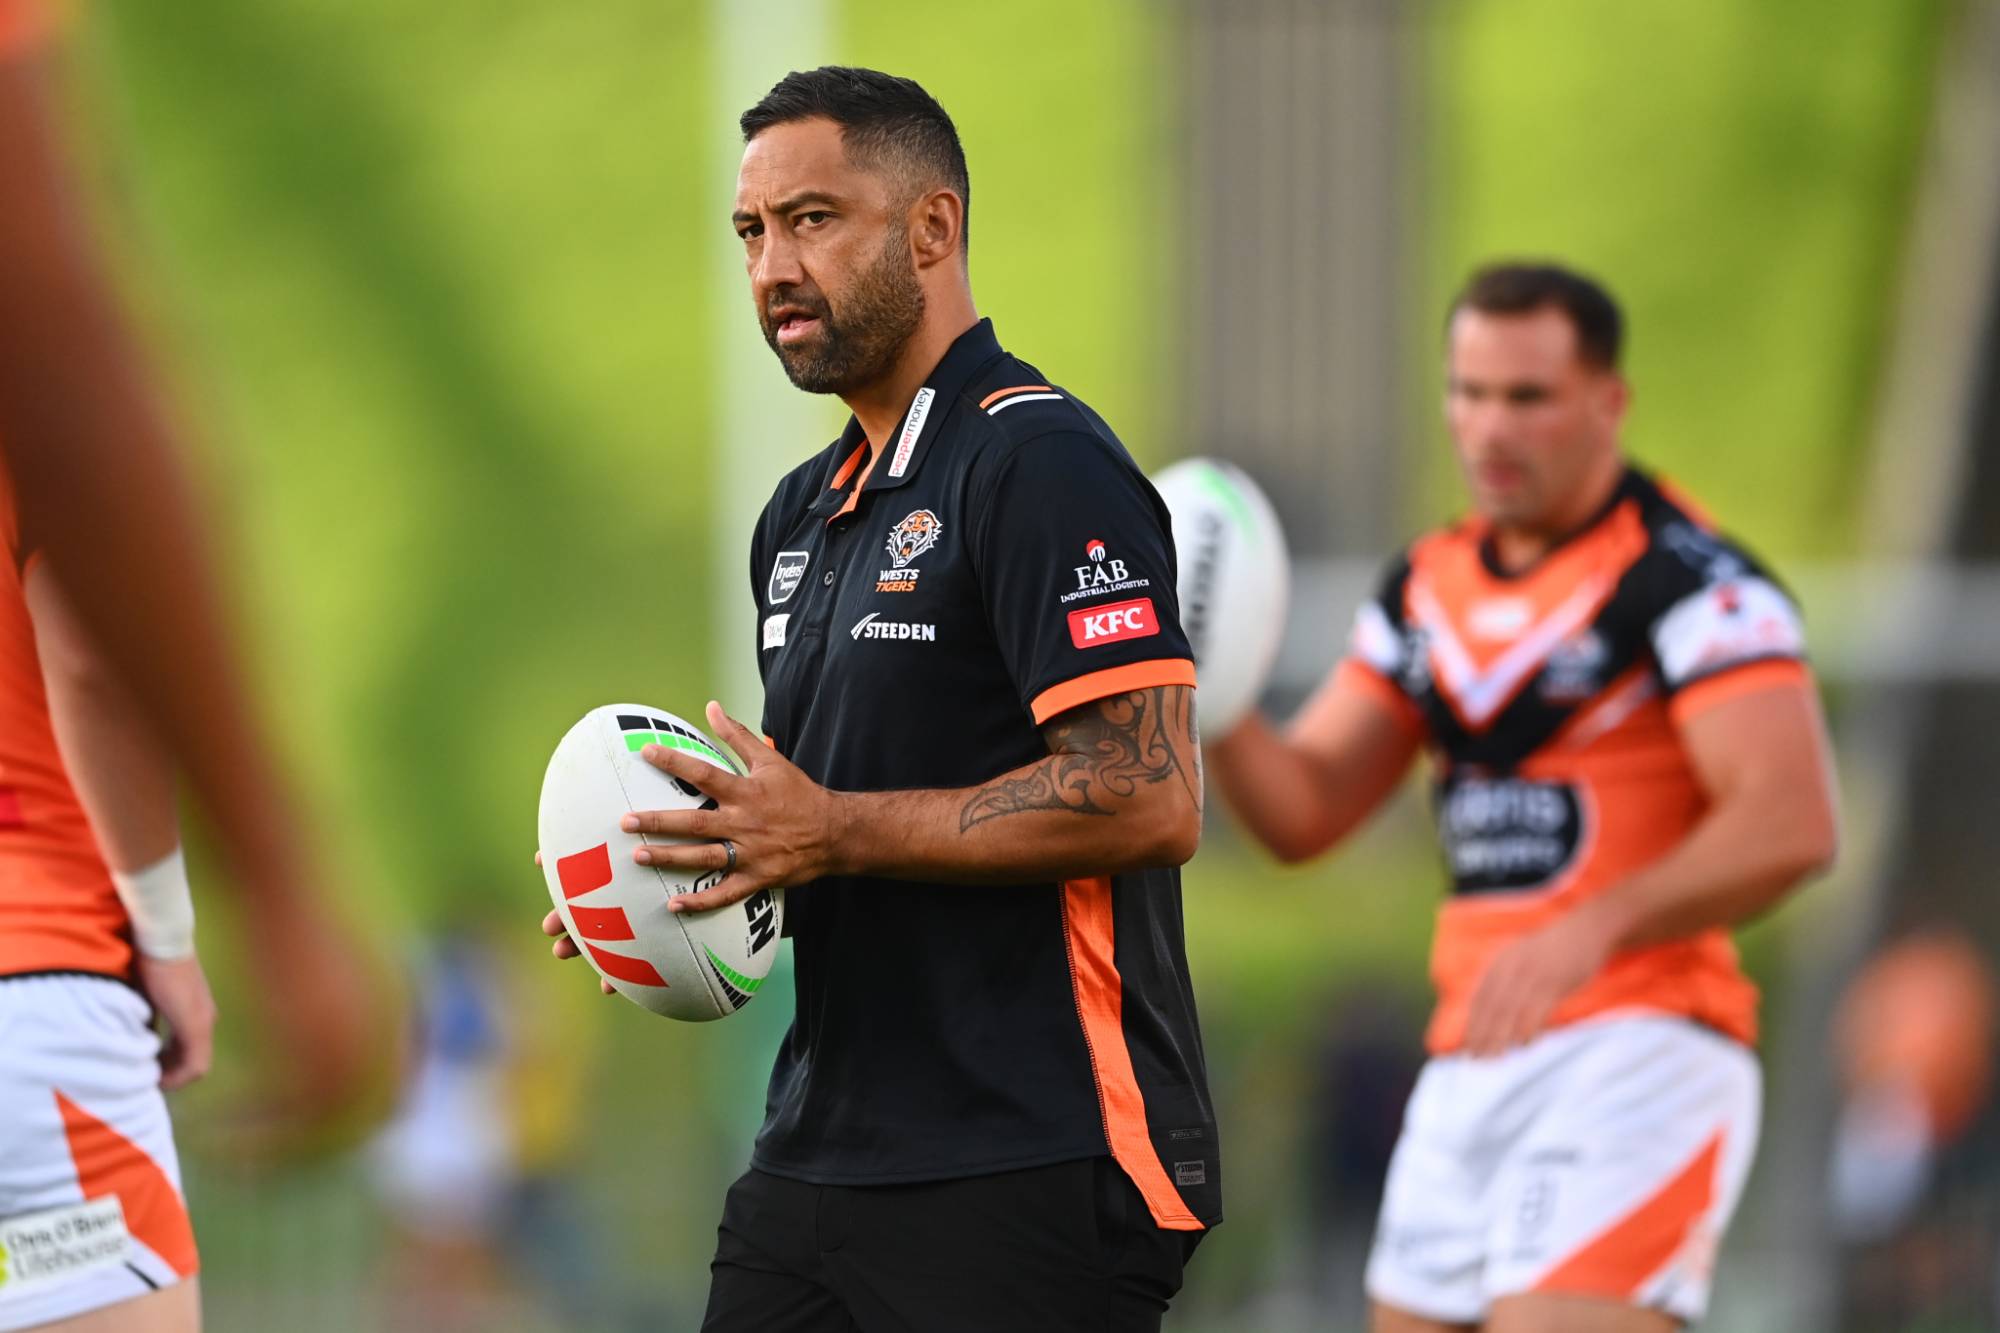 AUCKLAND, NEW ZEALAND - FEBRUARY 09: West Tigers assistant coach Benji Marshall looks on ahead of the NRL trial match between New Zealand Warriors and Wests Tigers at Mt Smart Stadium on February 09, 2023 in Auckland, New Zealand. (Photo by Hannah Peters/Getty Images)